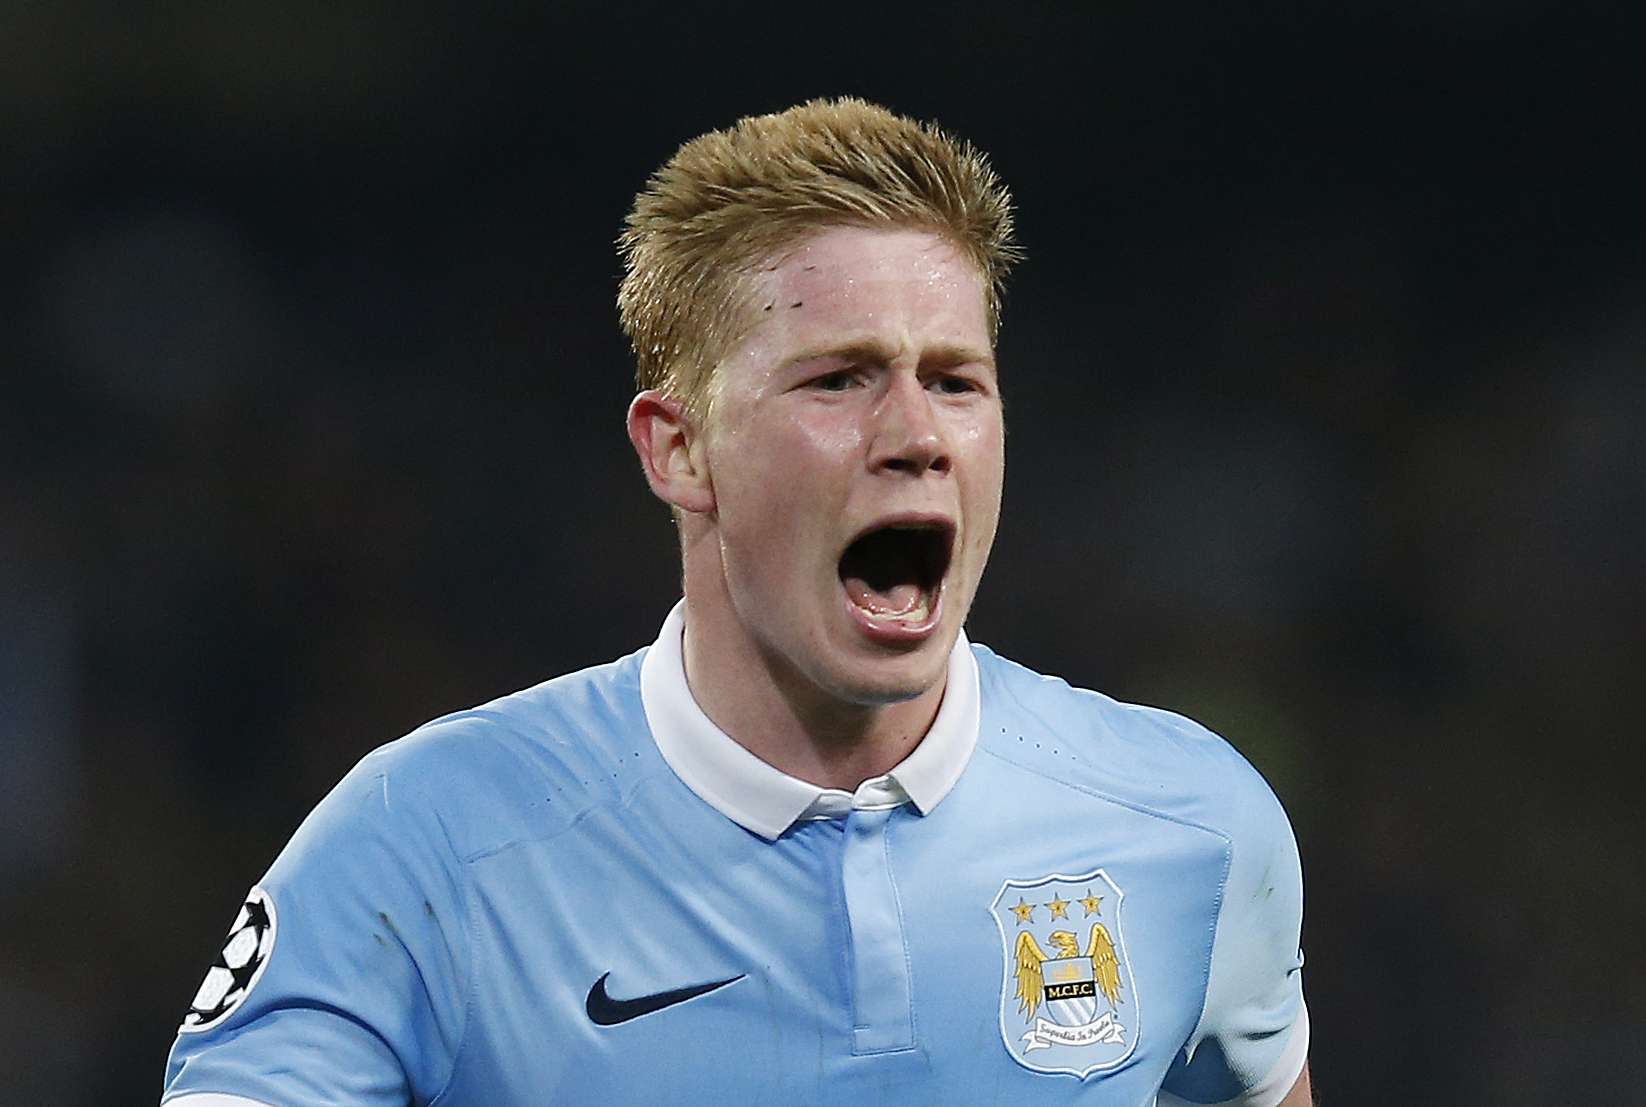 Kevin de Bruyne celebrates scoring the first goal for Manchester City. Photo: Reuters